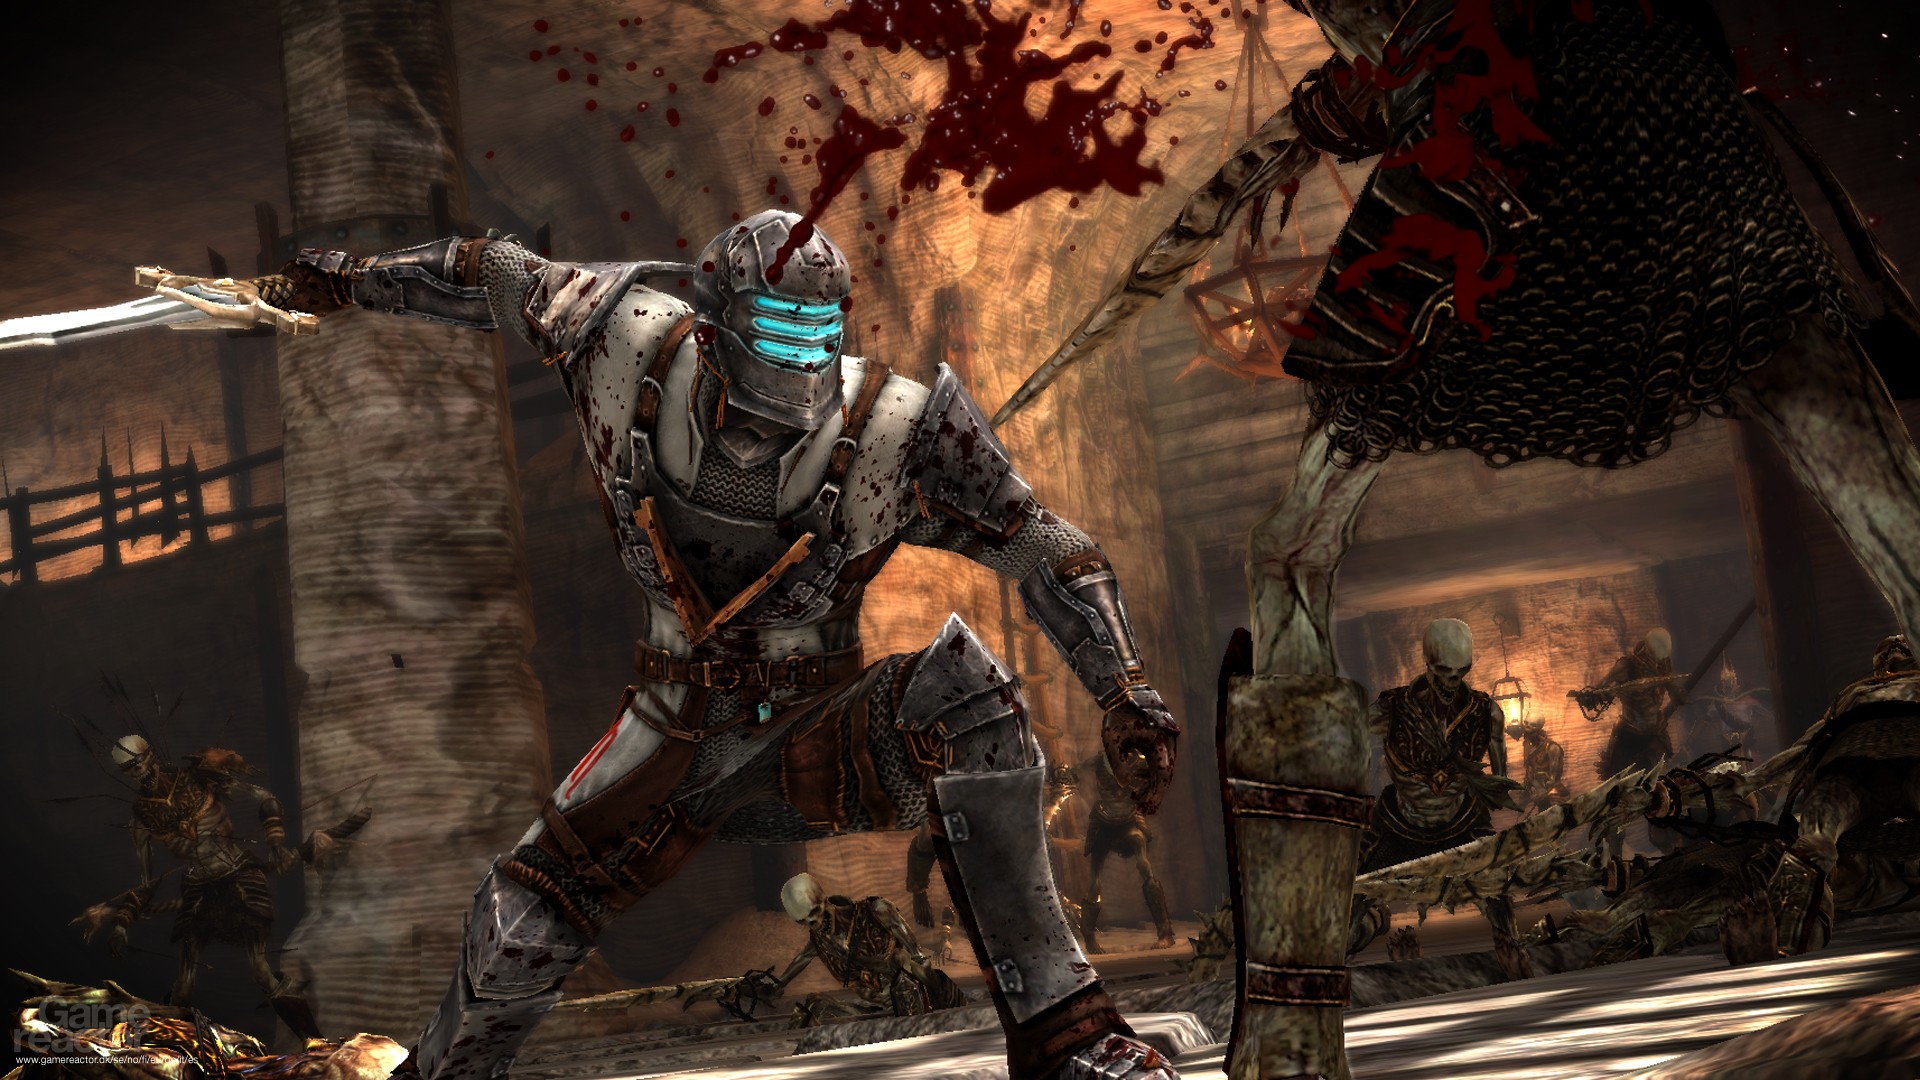 free download dead space